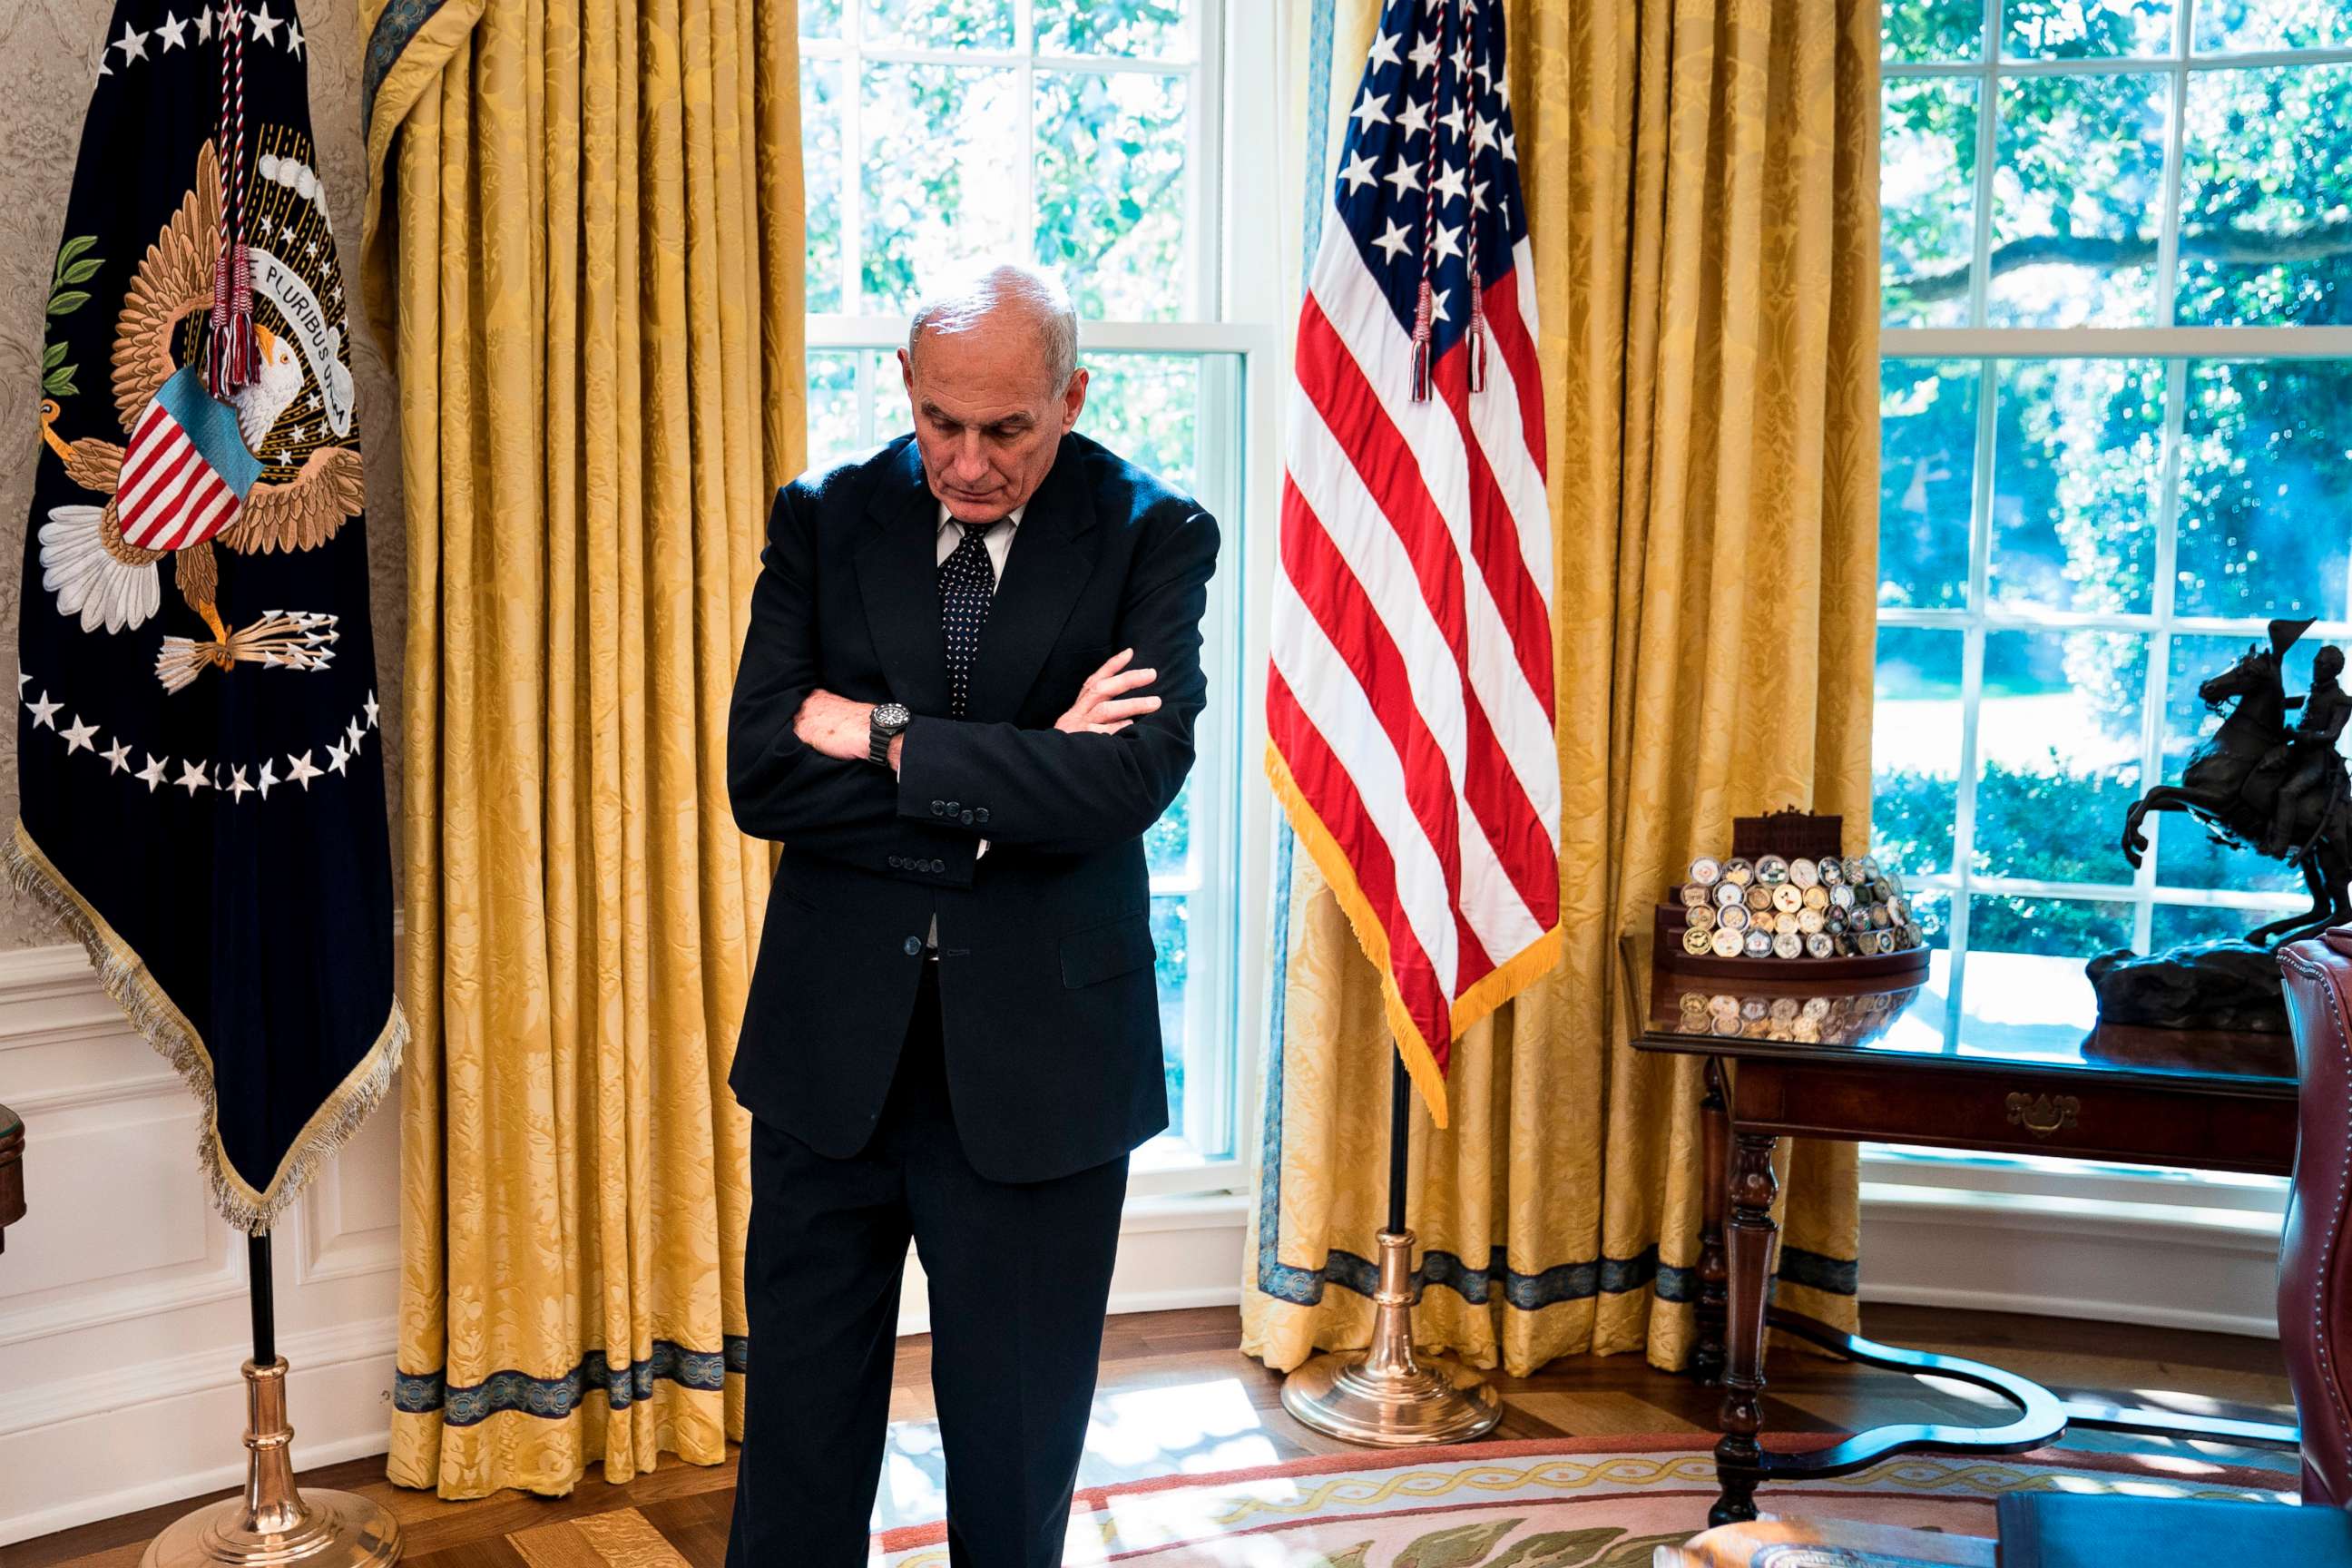 PHOTO: White House Chief of Staff John Kelly waits while Governor of Puerto Rico Ricardo Rossello and President Donald Trump make statement to the press before a meeting  in the Oval Office of the White House, Oct. 19, 2017.